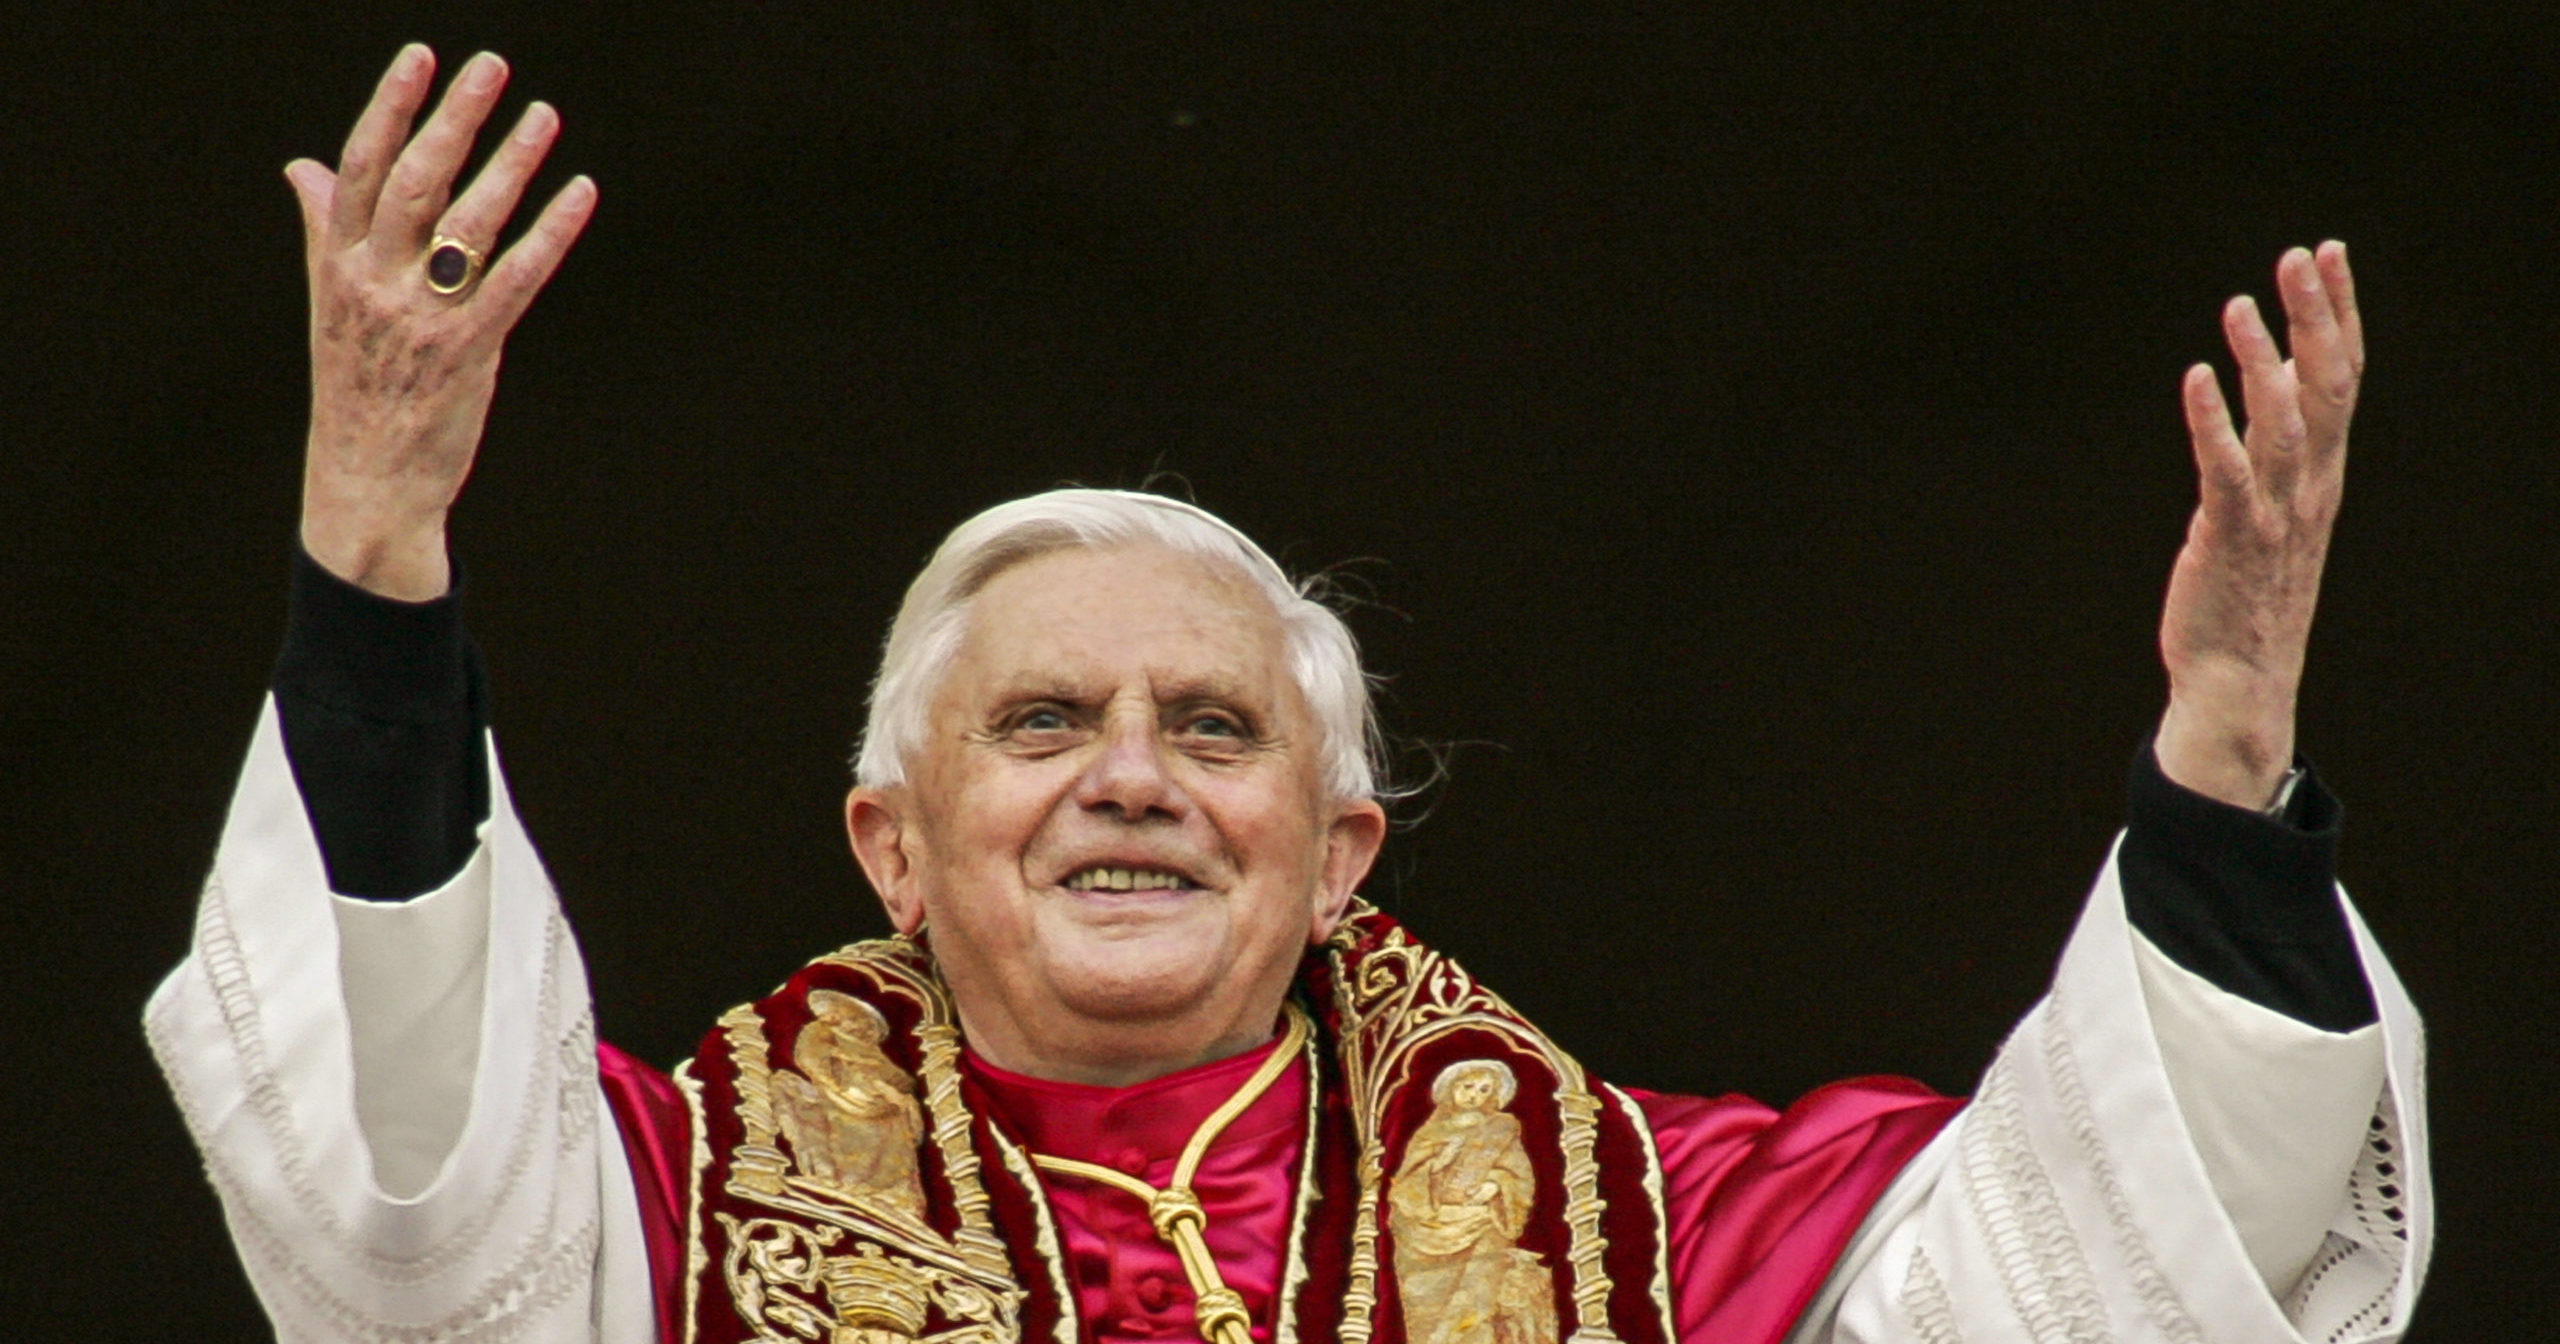 Pope Benedict XVI greets the crowd from the central balcony of St. Peter's Basilica at the Vatican on April 19, 2005, soon after his election.